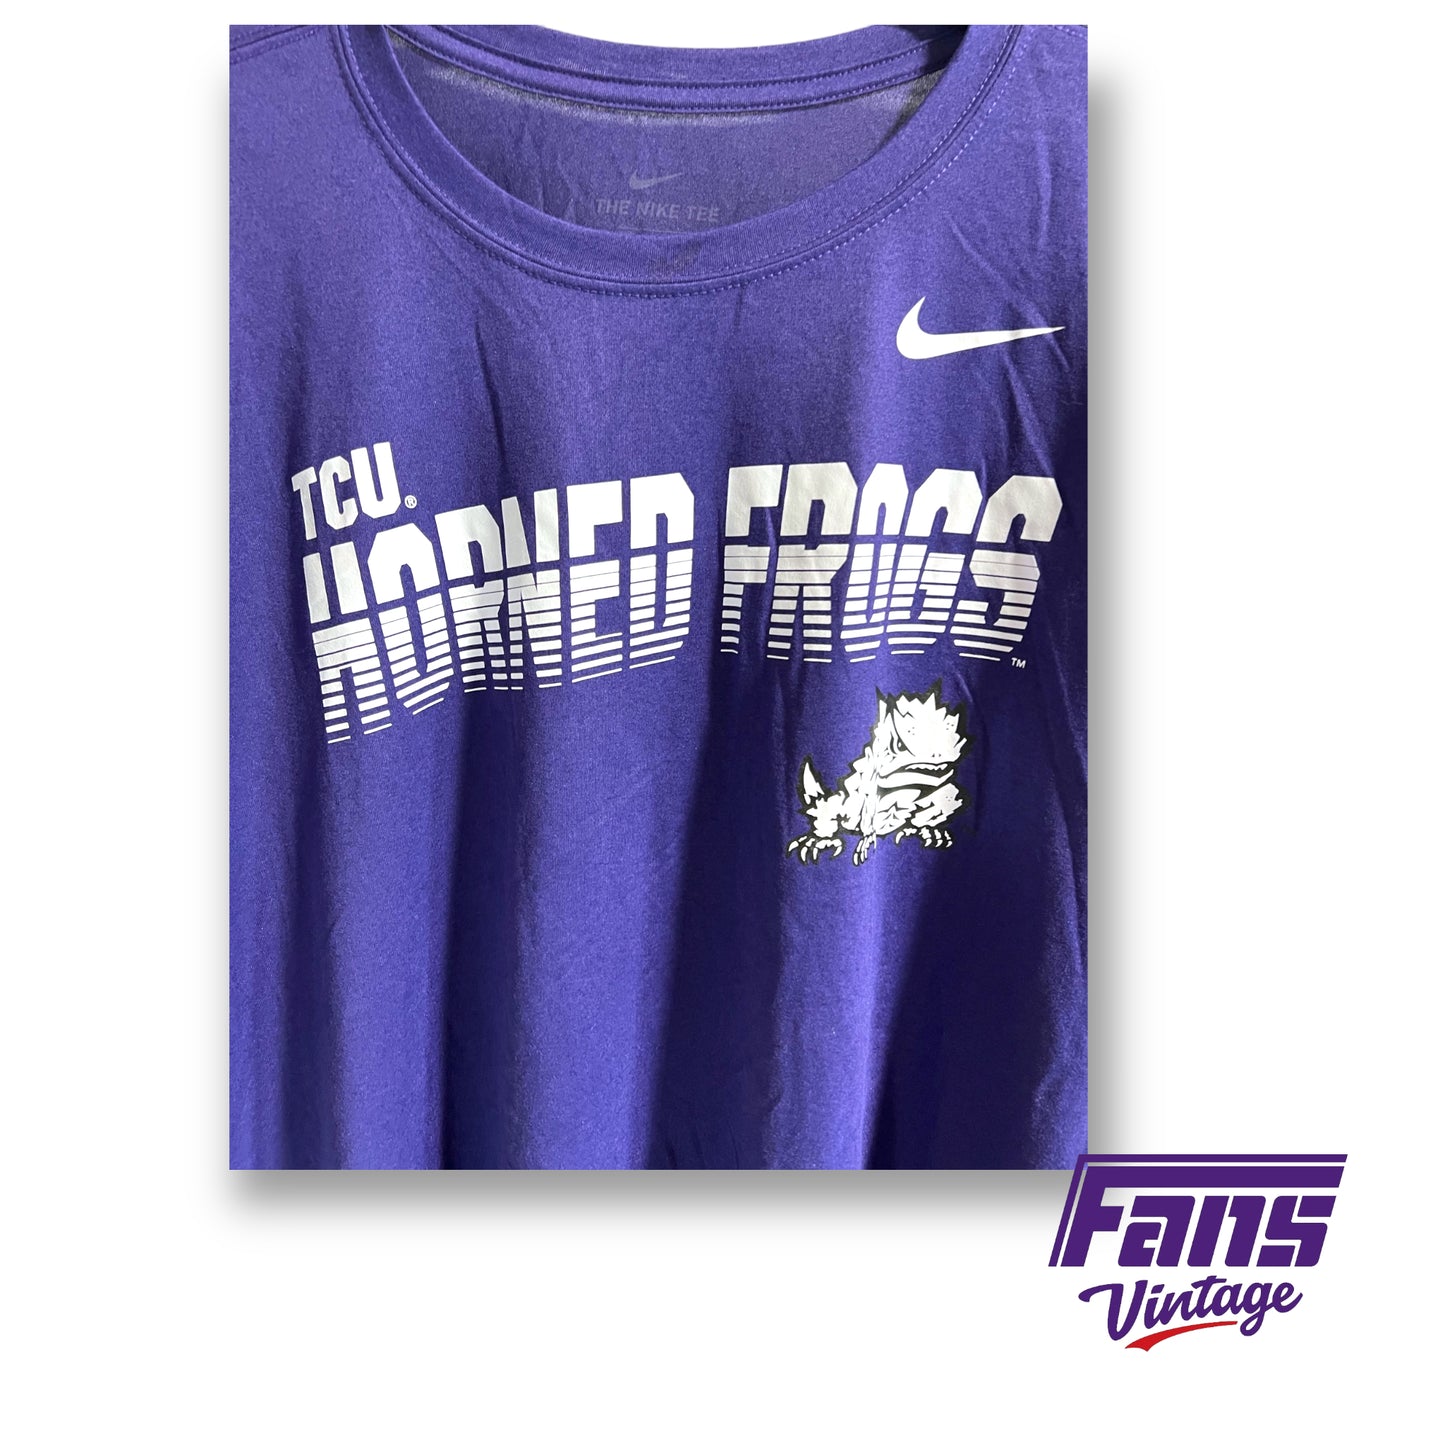 Nike TCU Horned Frogs t-shirt - New with tags